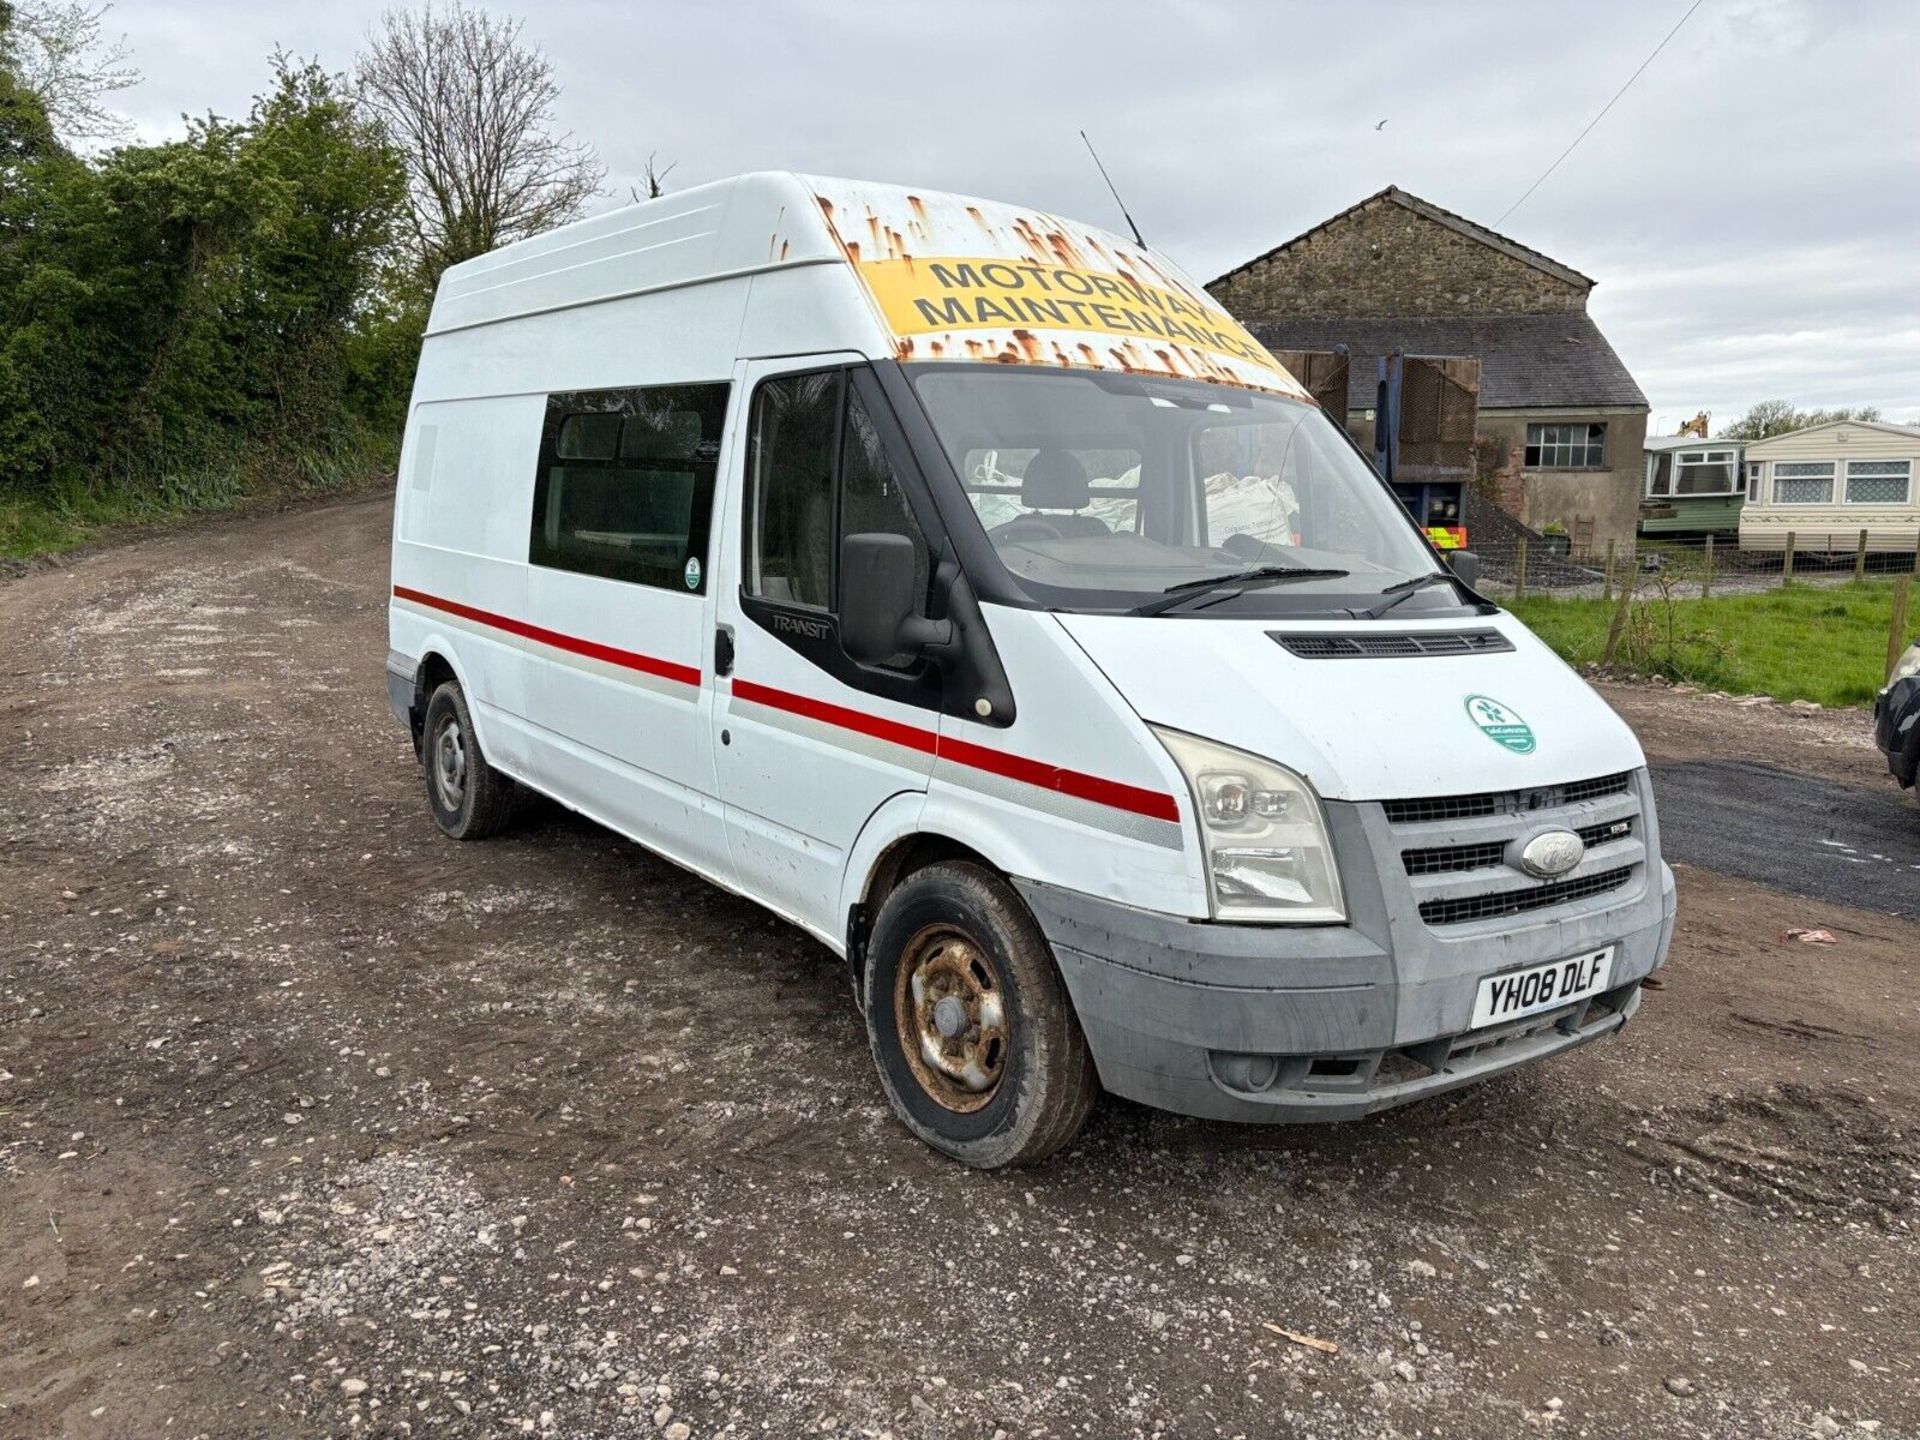 2008 FORD TRANSIT 5 SEAT WELFARE VEHICLE - Image 2 of 17